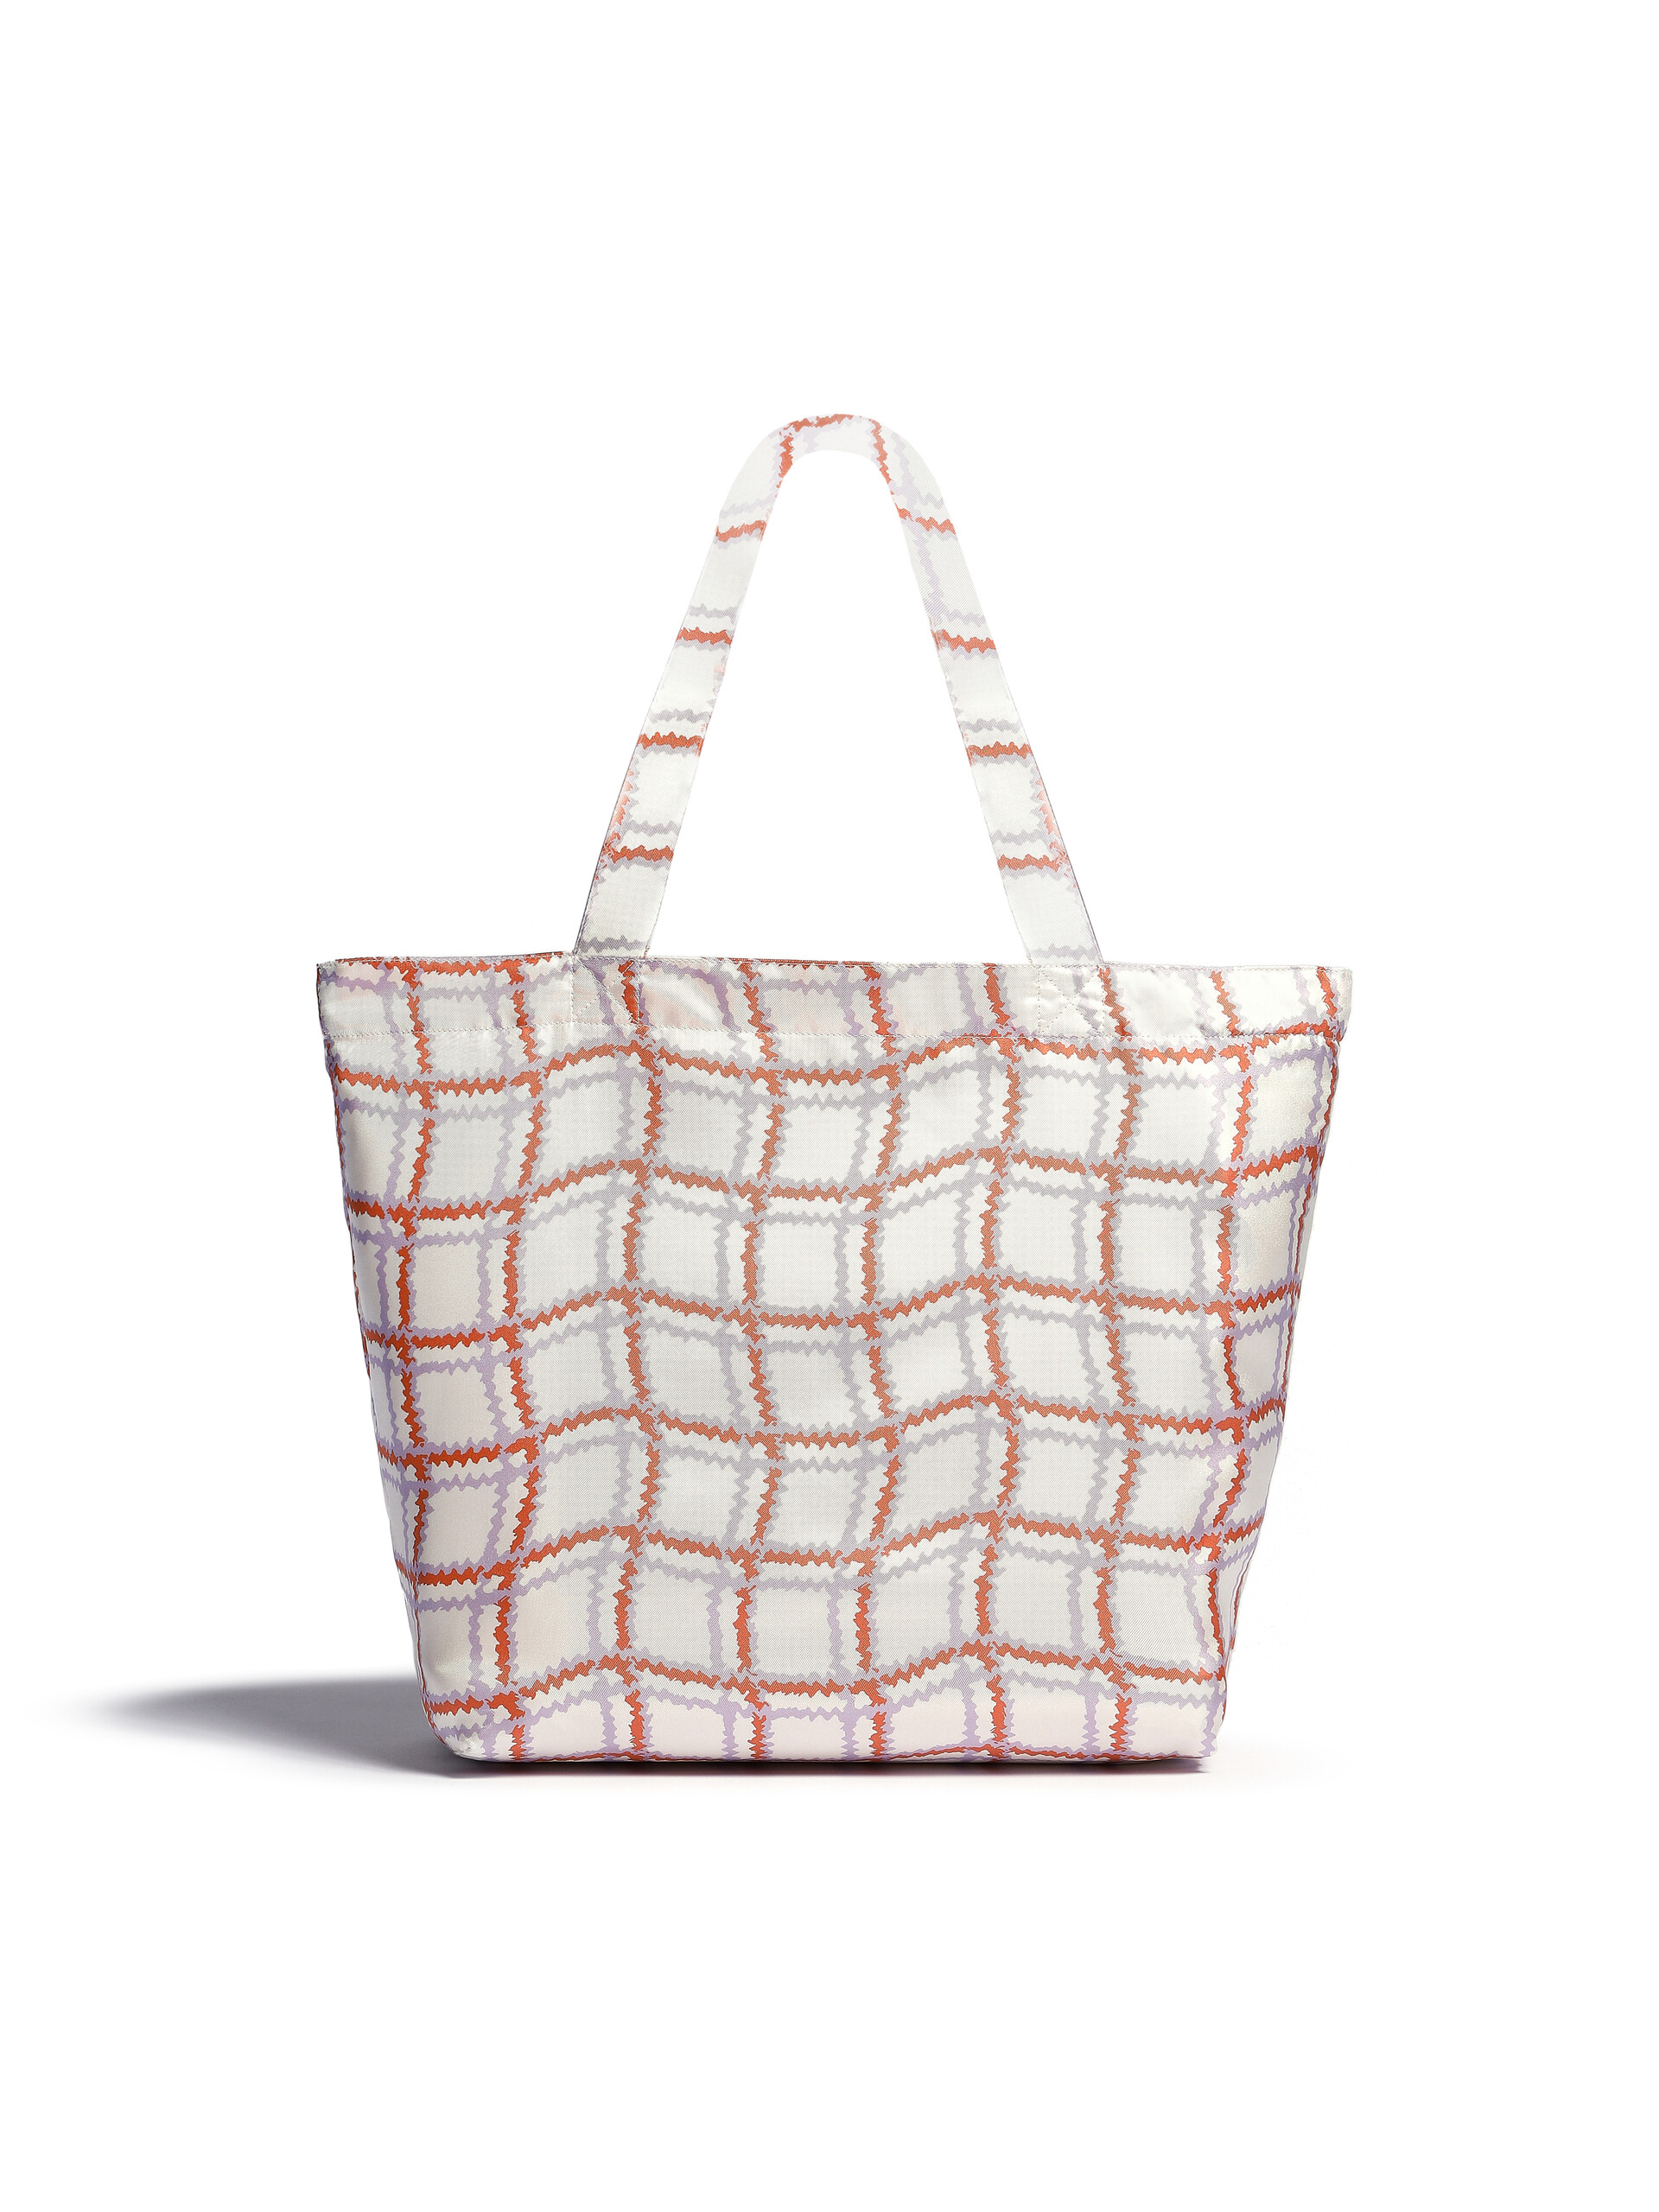 White silk tote bag with archival check print - Bags - Image 3